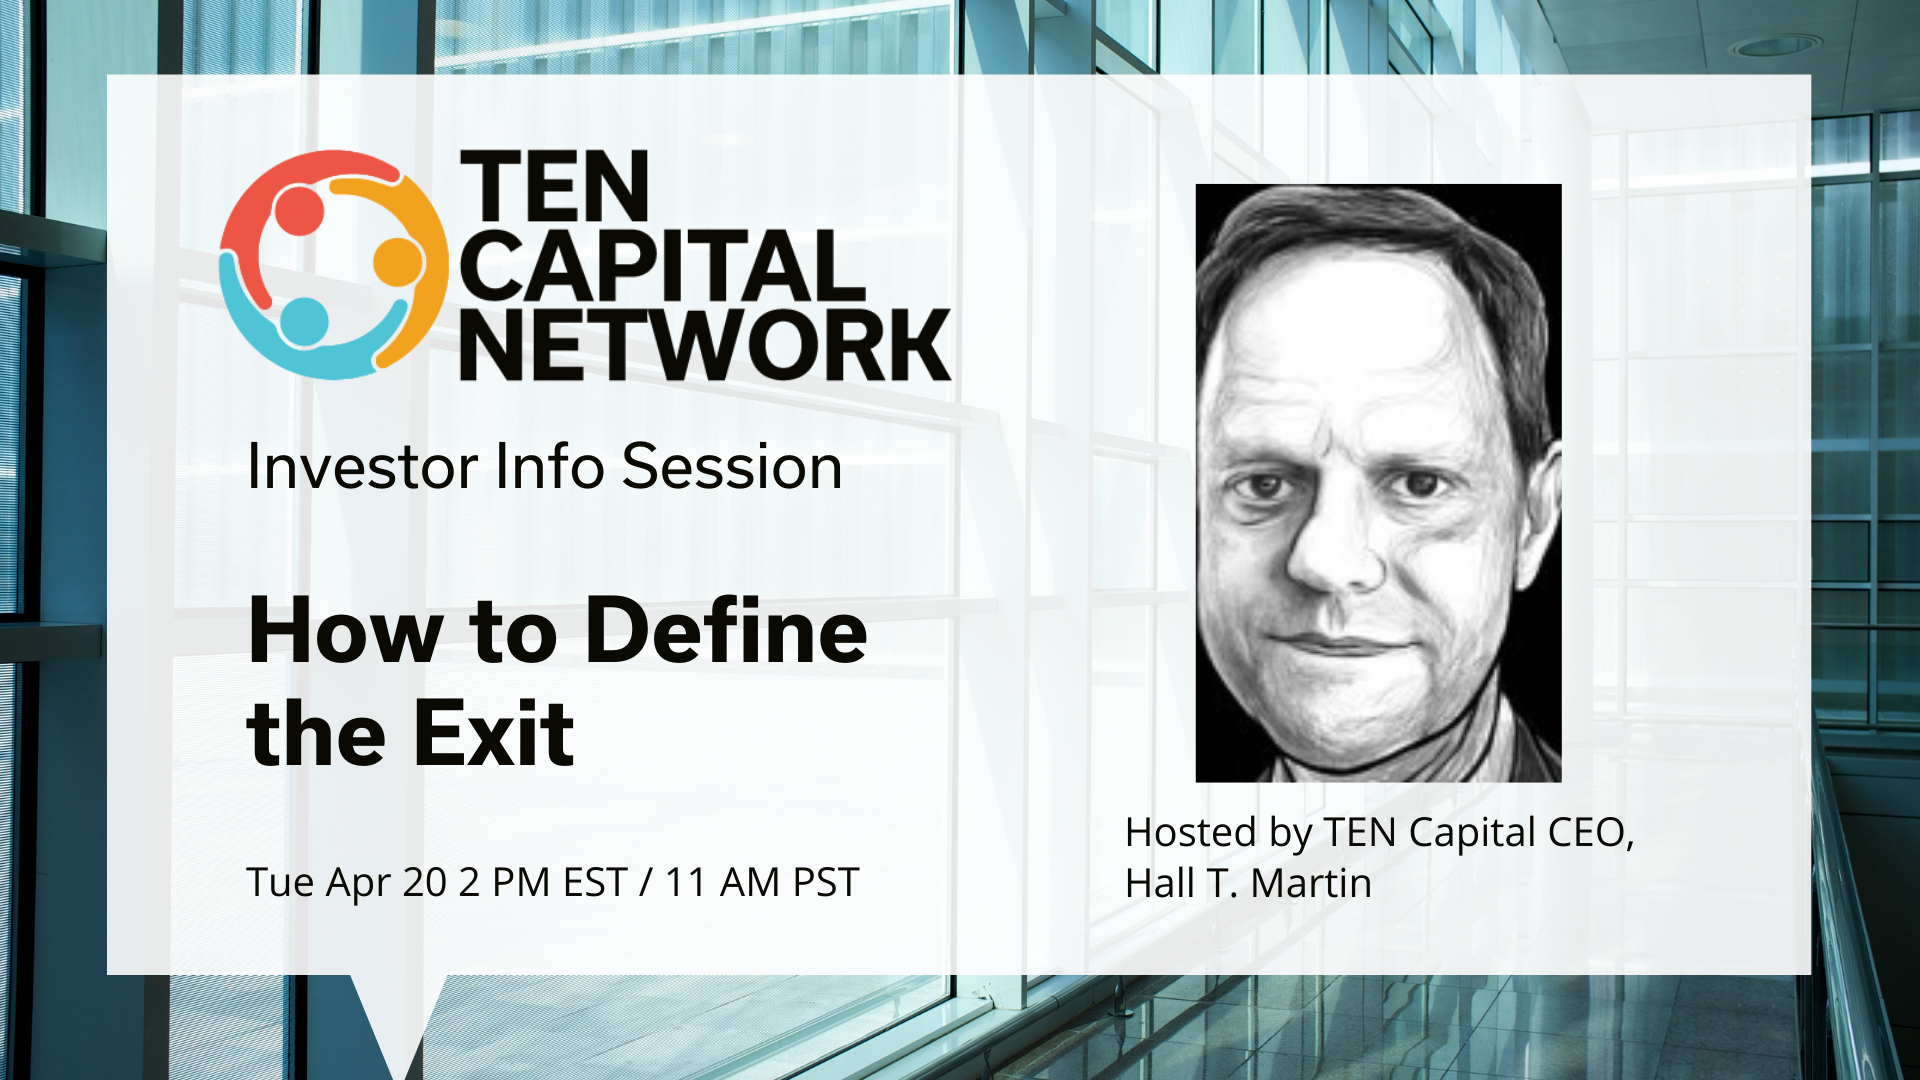 TEN Capital Presents: Investor Info Session - How to Define the Exit